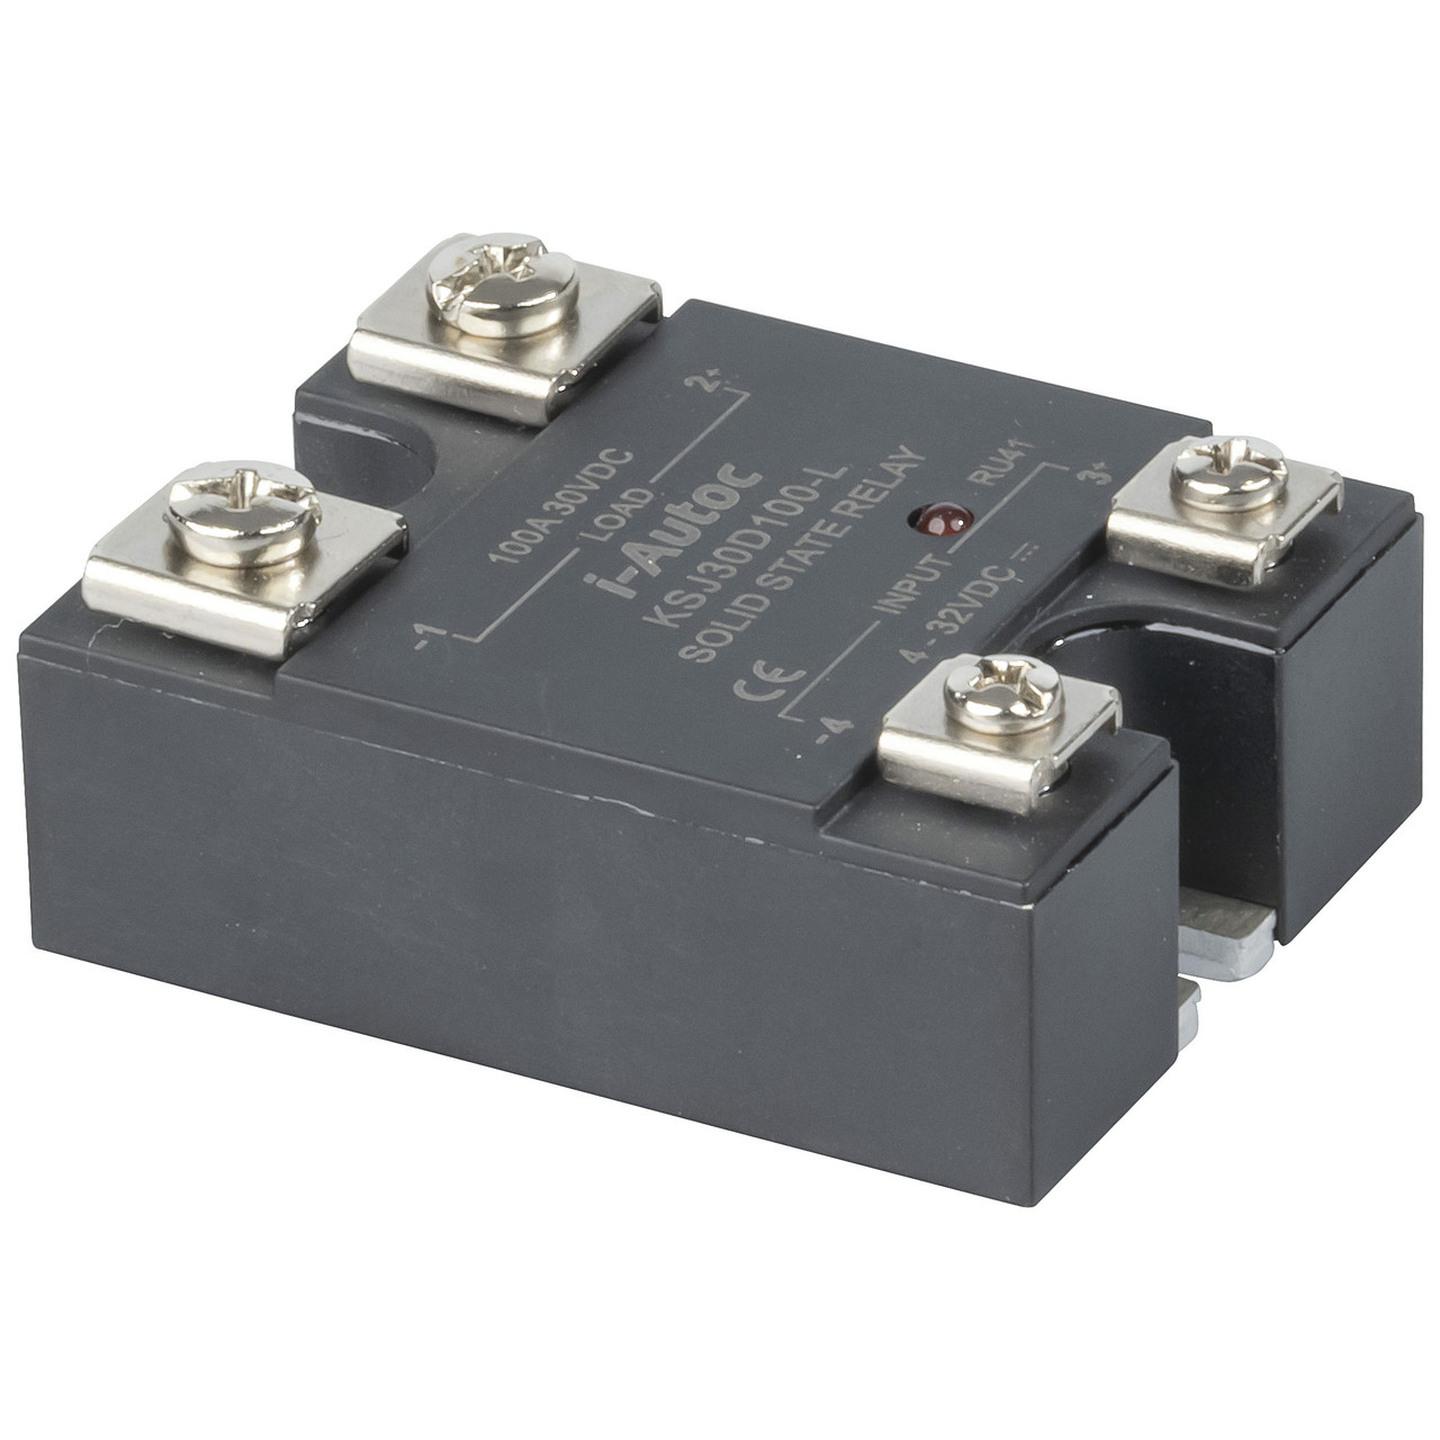 Solid State Relay 4-32VDC Input 30VDC 100A Switching